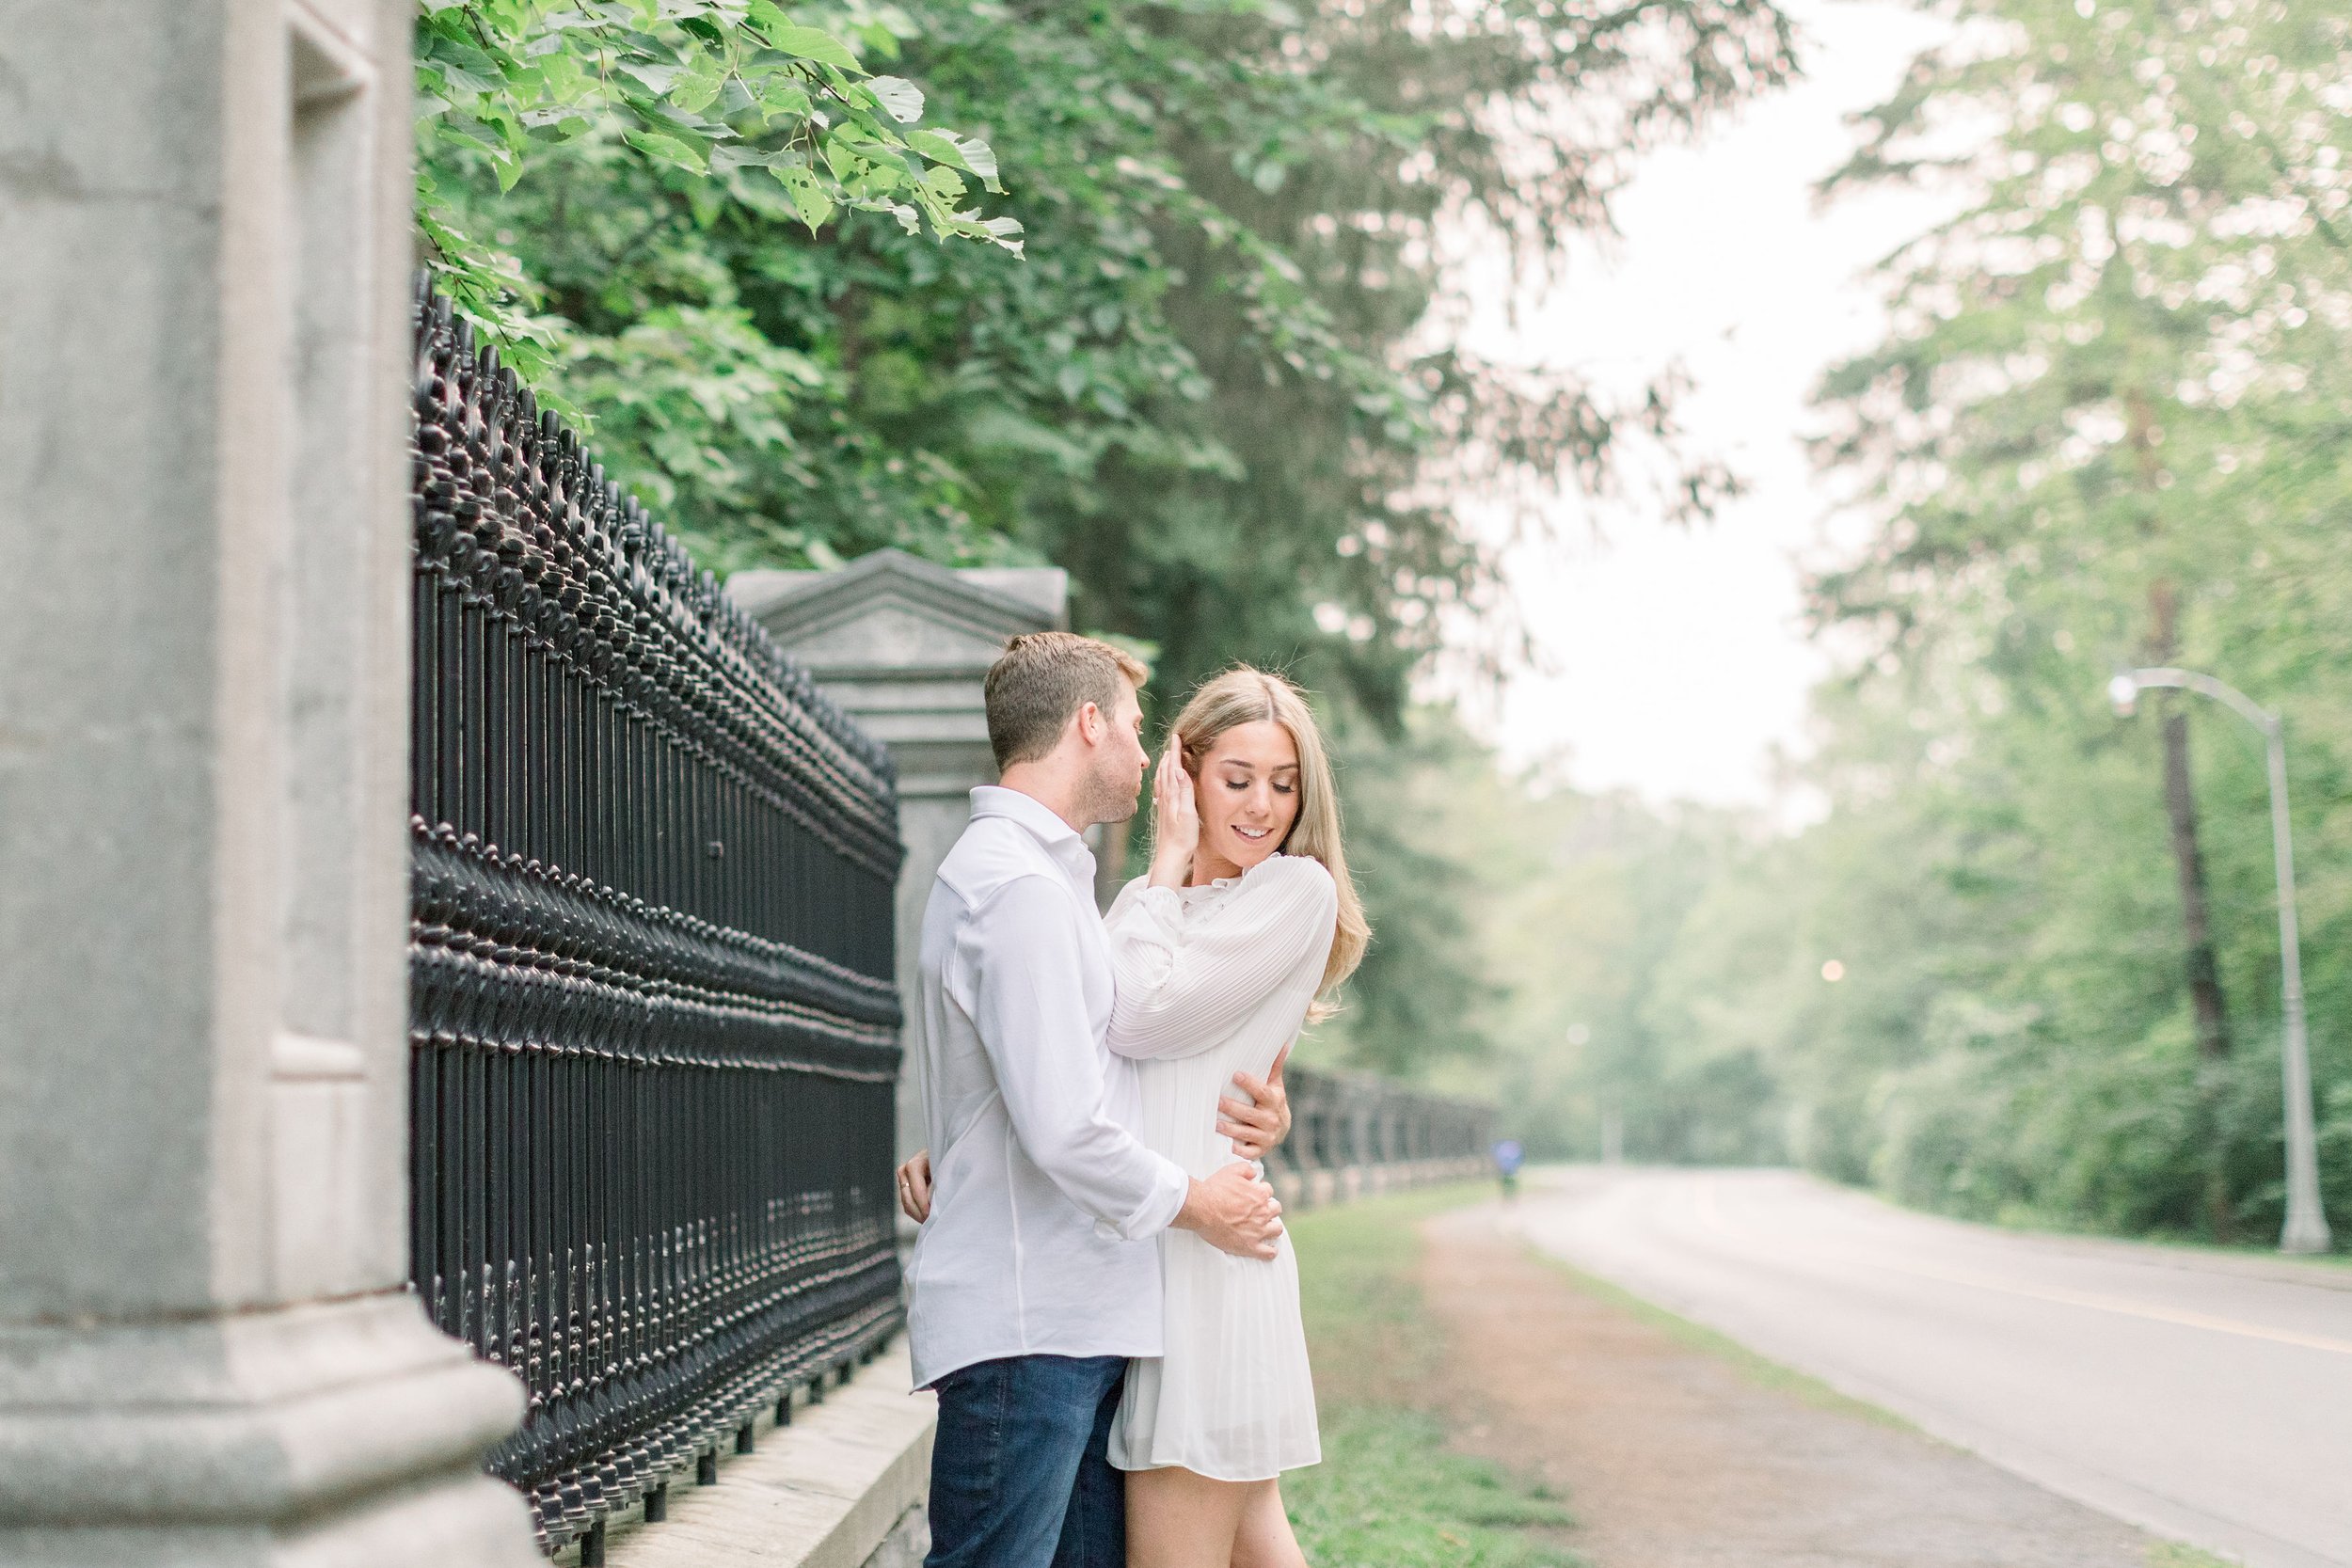  Standing next to a black fence and road a woman tucks her hair behind her ear captured by Chelsea Mason Photography. stunning engagements #Ottawaengagements #Ottawaweddingphotographers #engagement #ChelseaMasonPhotography #ChelseaMasonEngagements&nb